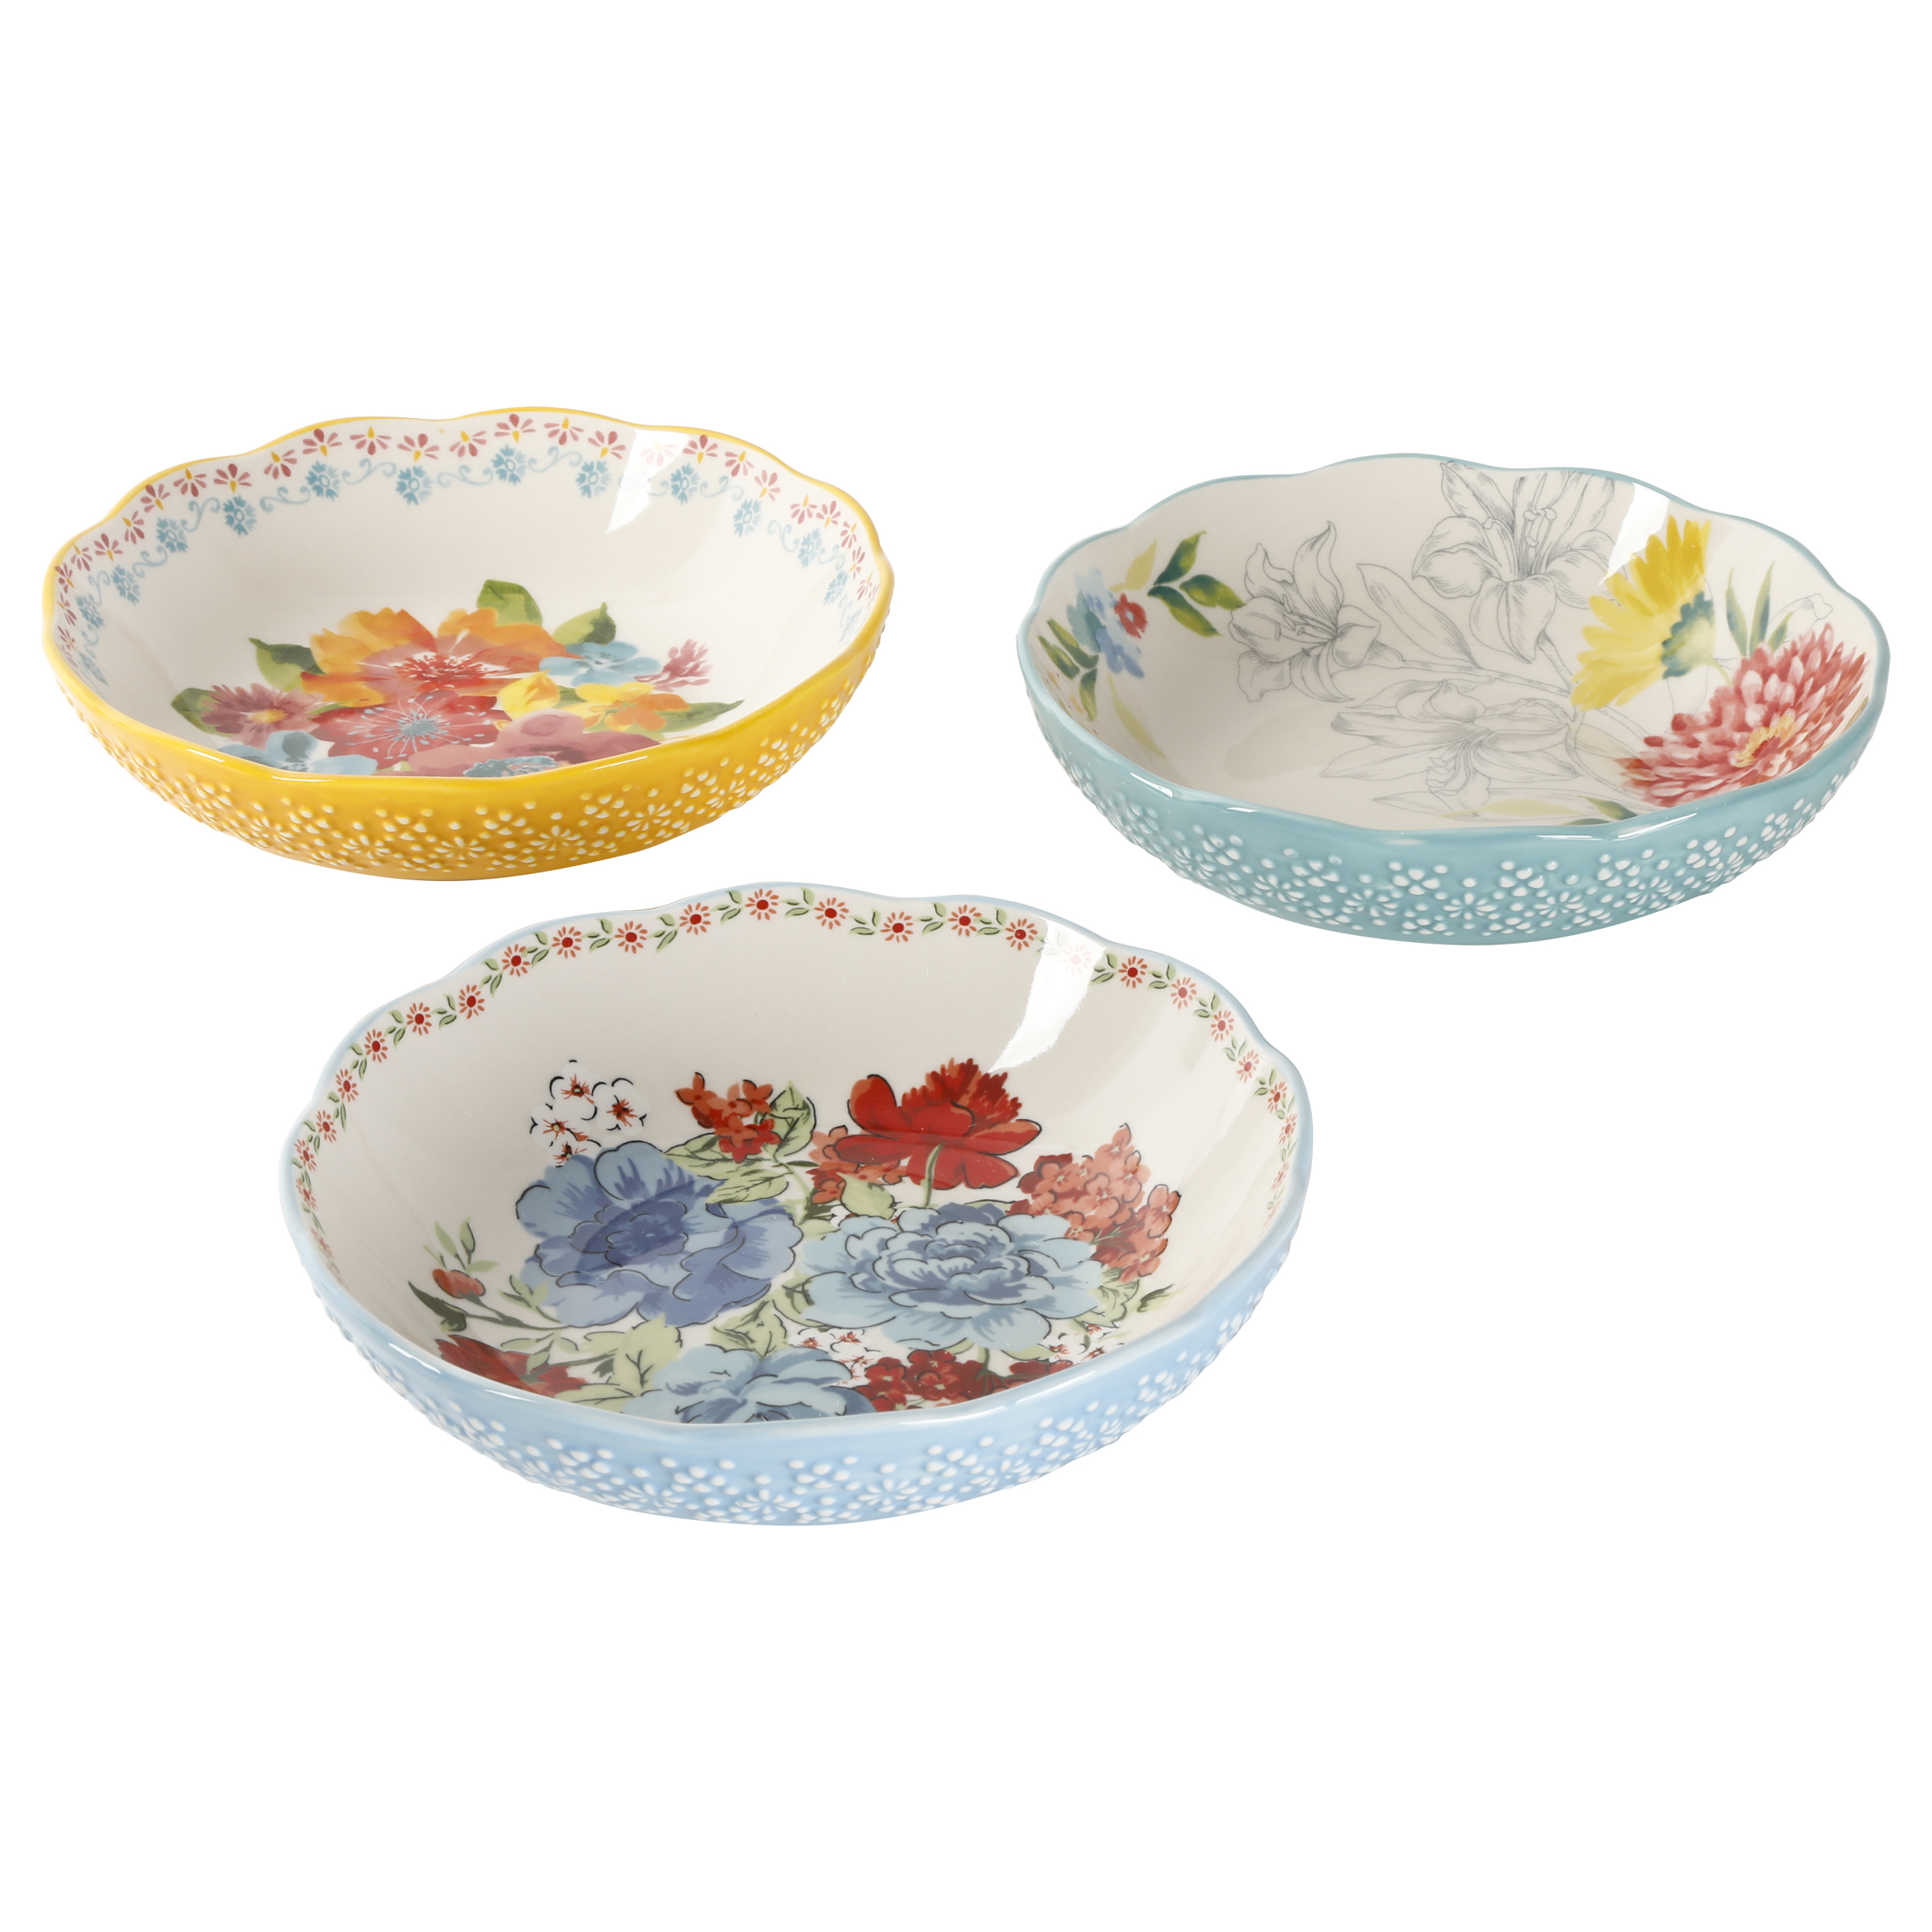 The Pioneer Woman Floral Medley Assorted Ceramic 7.5-inch Pasta Bowls, 3-Pack - image 1 of 9